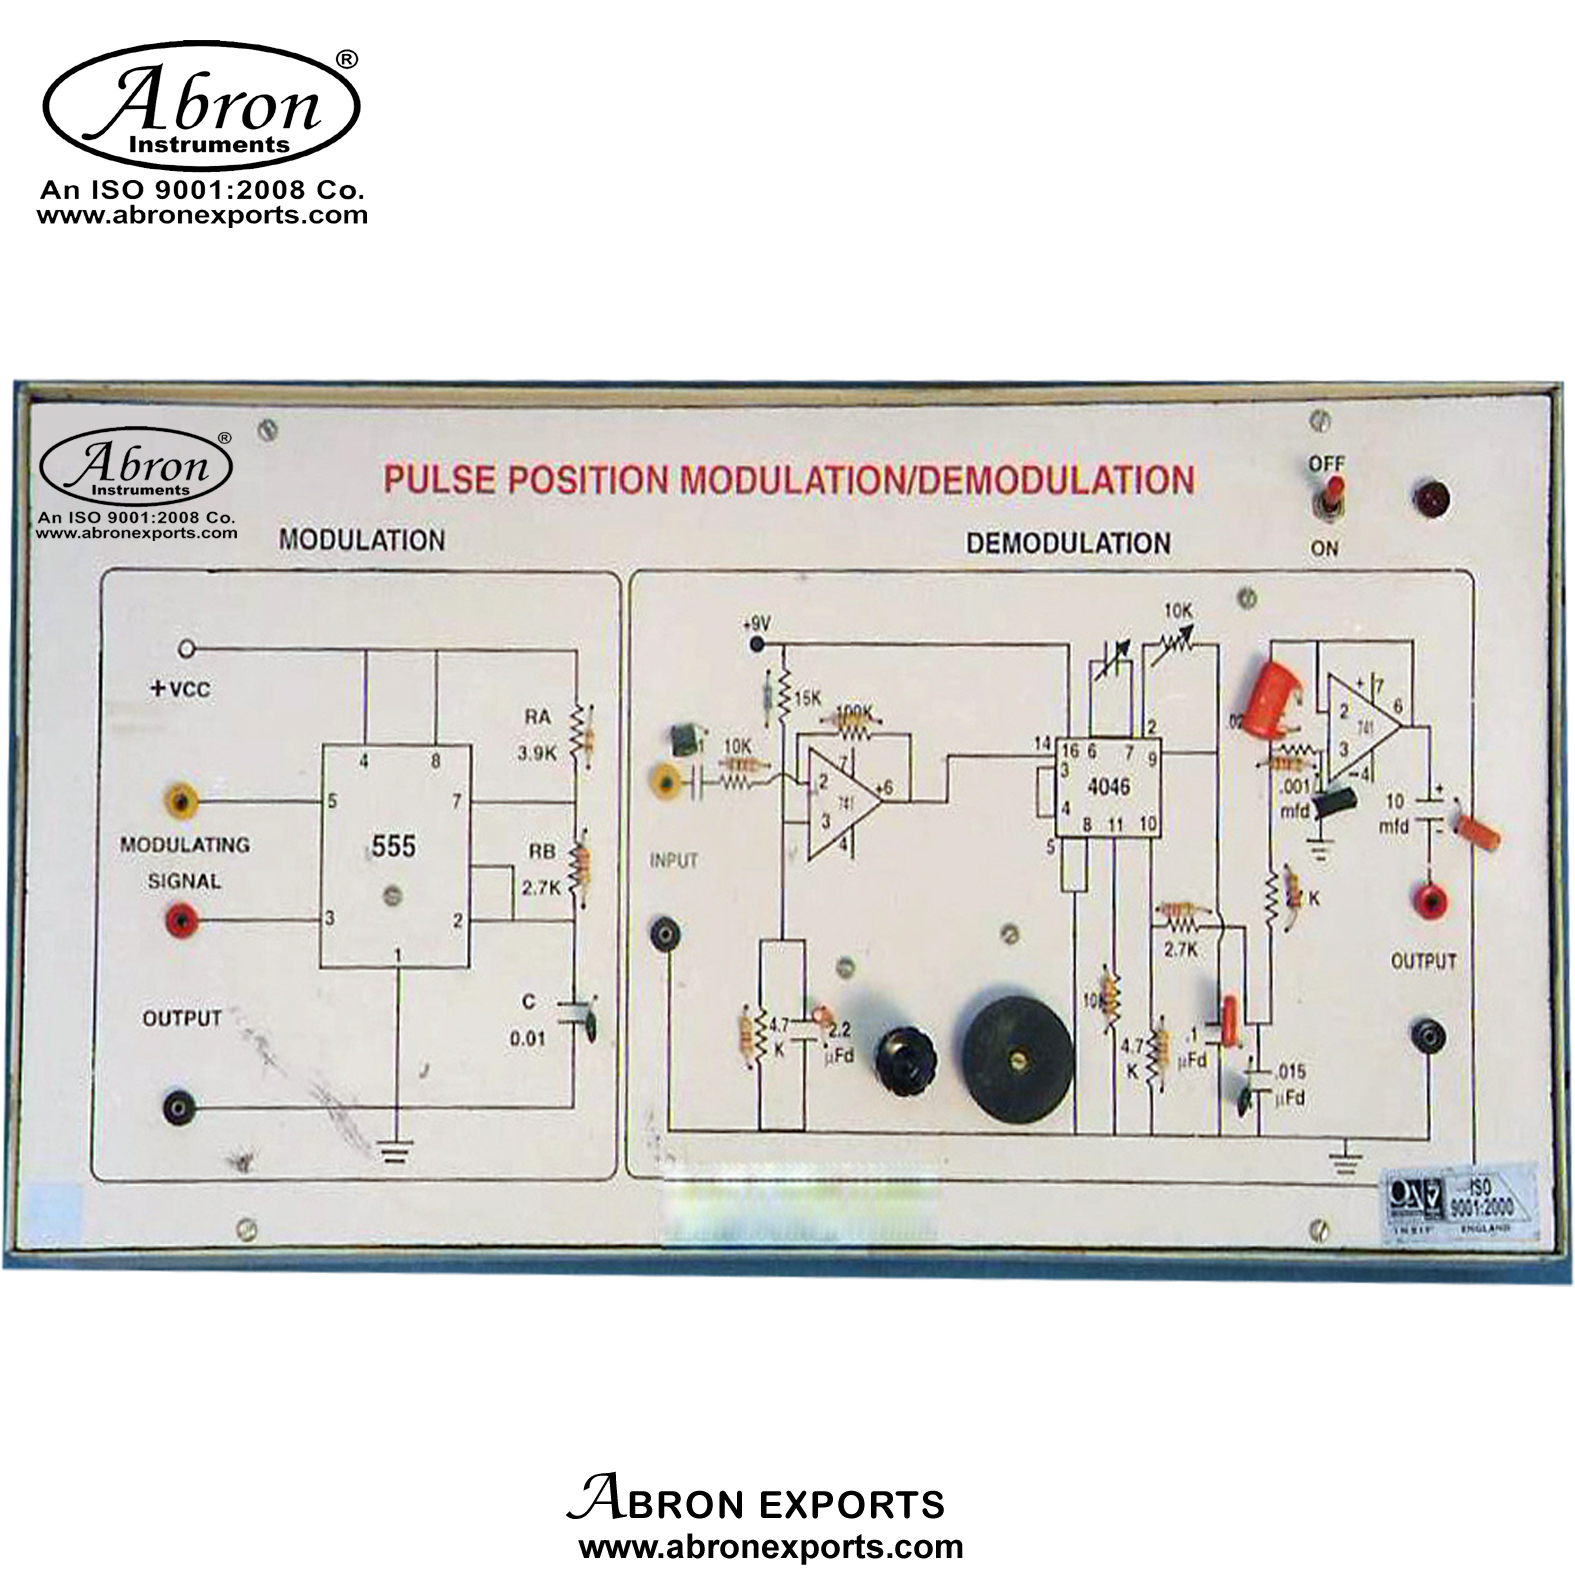 Pulse Position Modulation And Demodulation circuit trainer kit with sockets and power supply connecting wires AE-1309-P